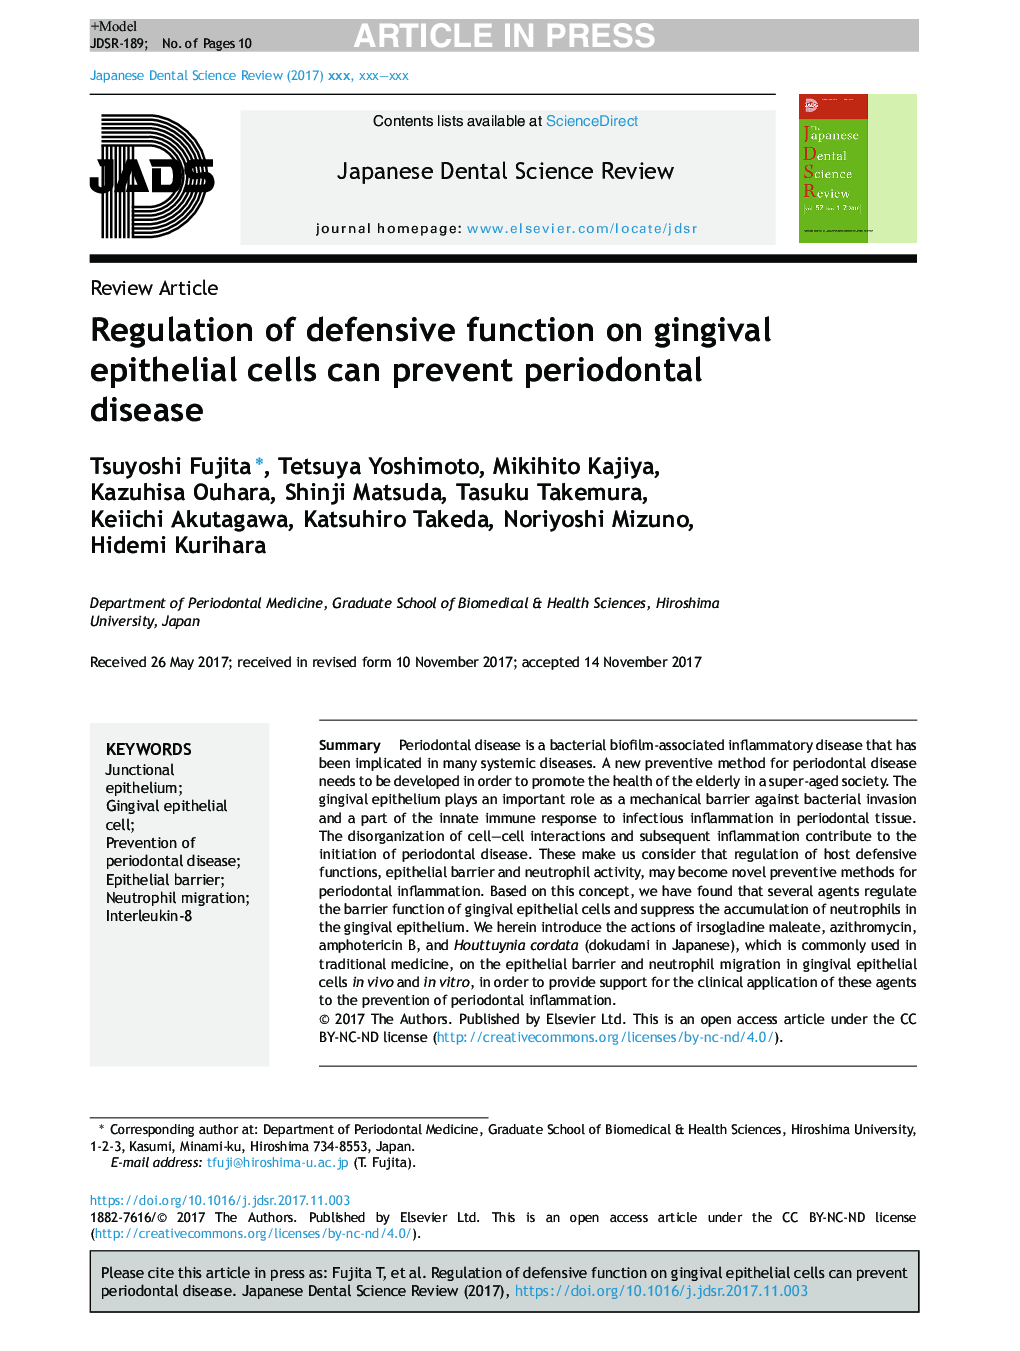 Regulation of defensive function on gingival epithelial cells can prevent periodontal disease